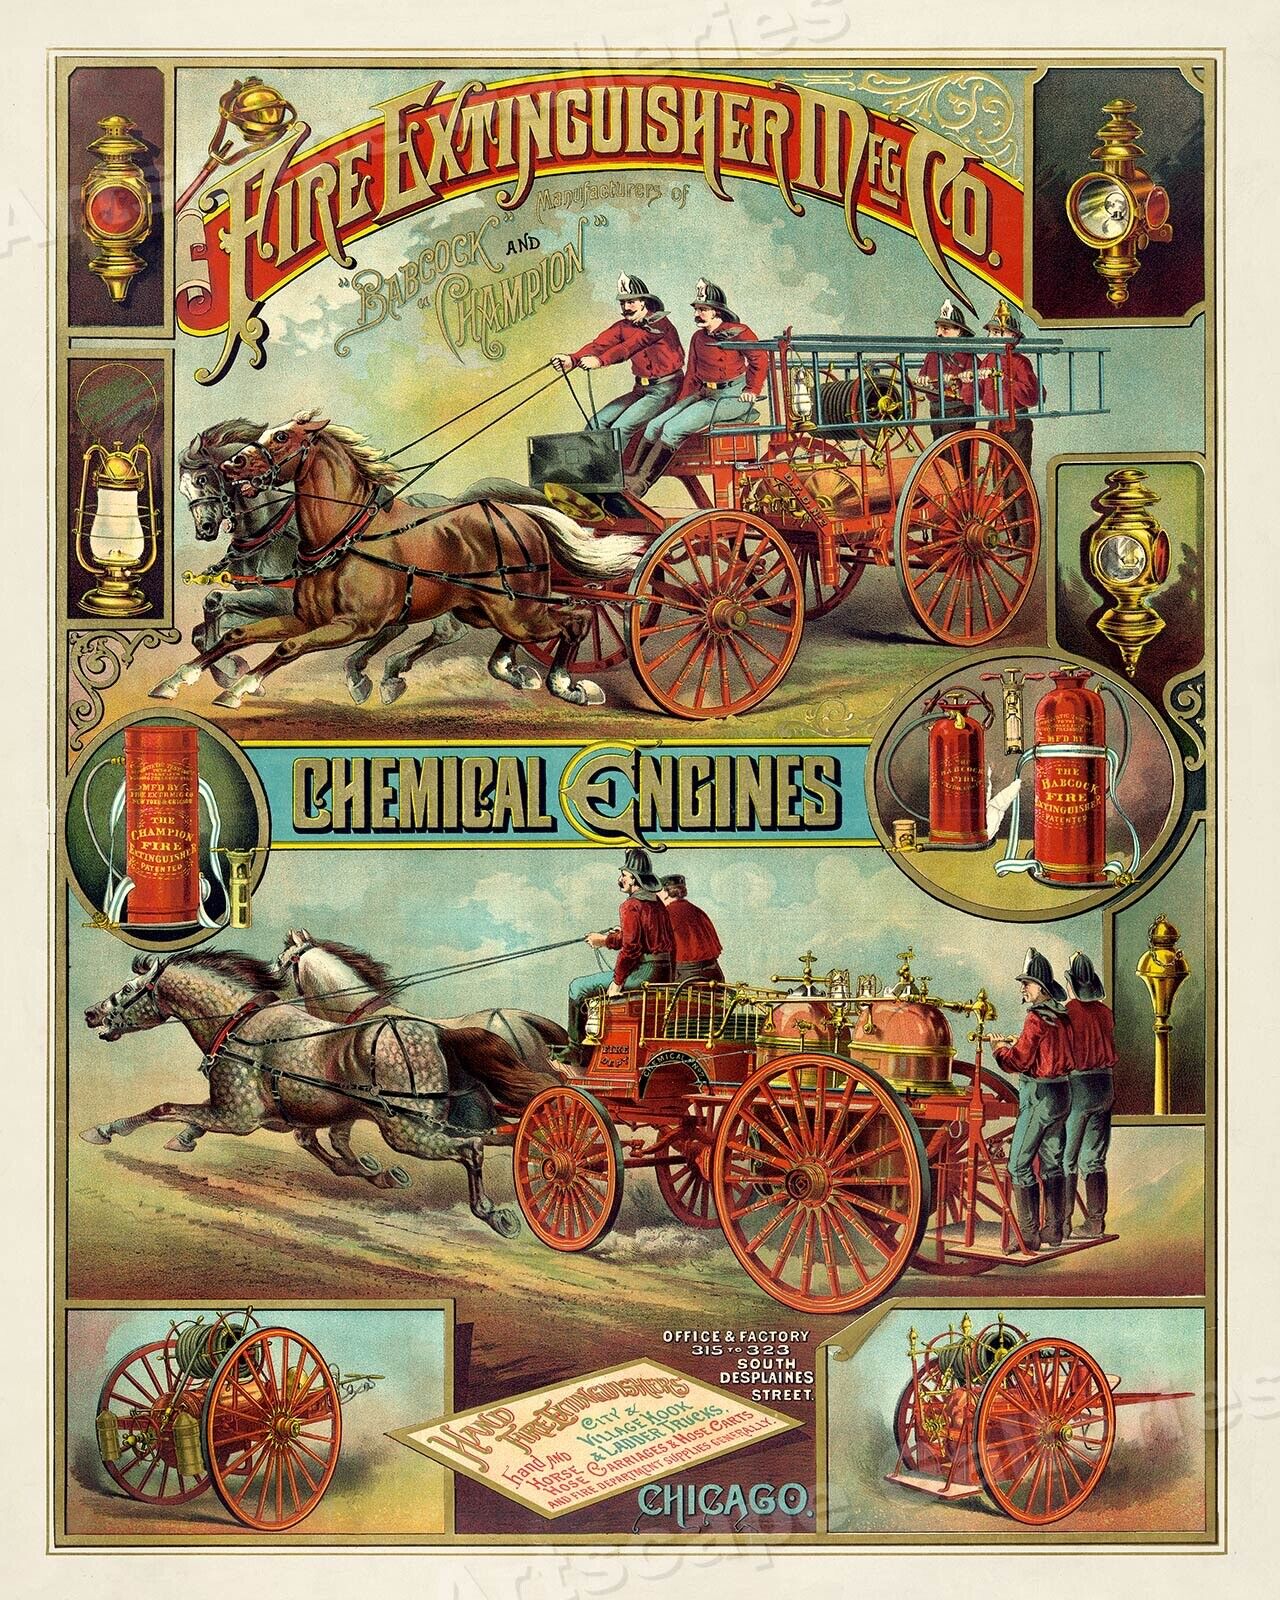 Chicago Fire Extinguisher 1880s Vintage Style Advertising Poster - 16x20